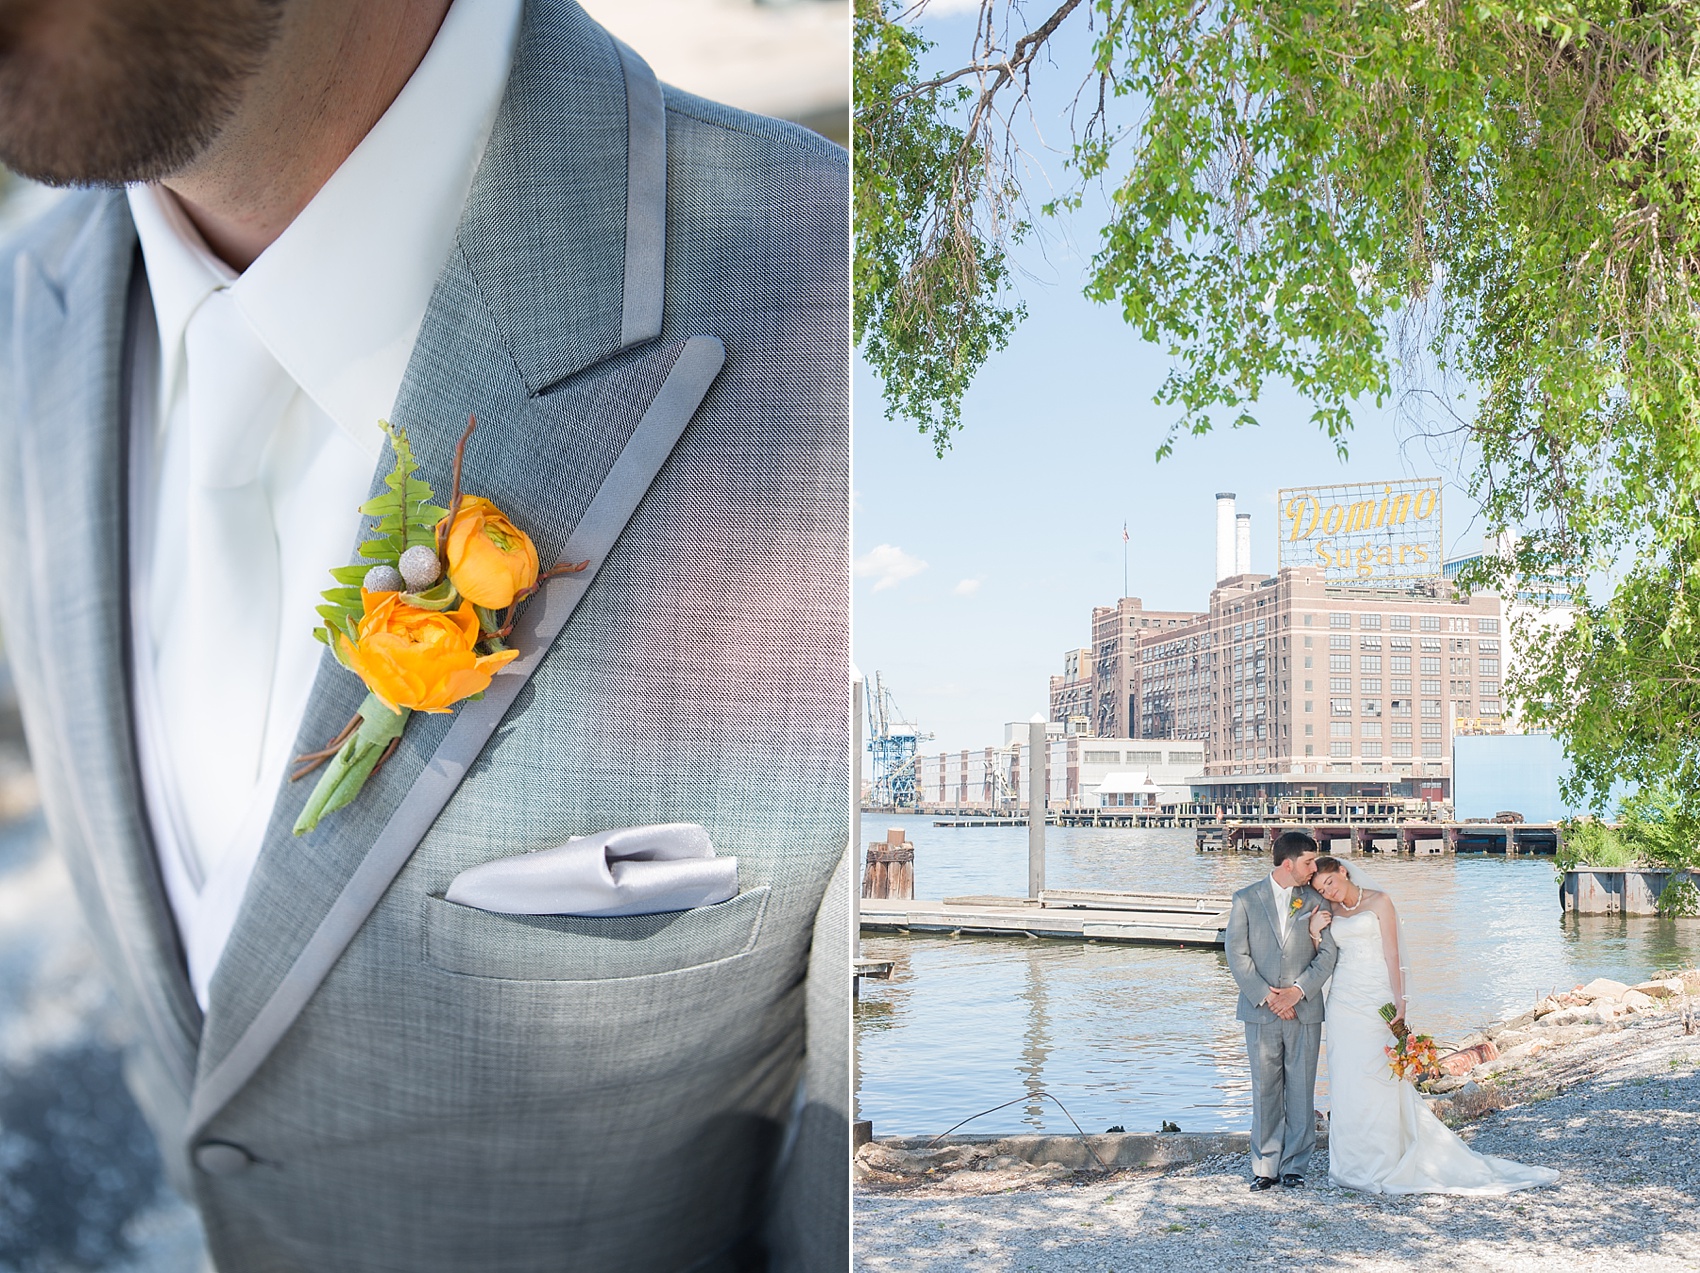 Groom's orange ranunculus boutonniere in Baltimore, Maryland Museum of Industry. Photos by Mikkel Paige Photography.